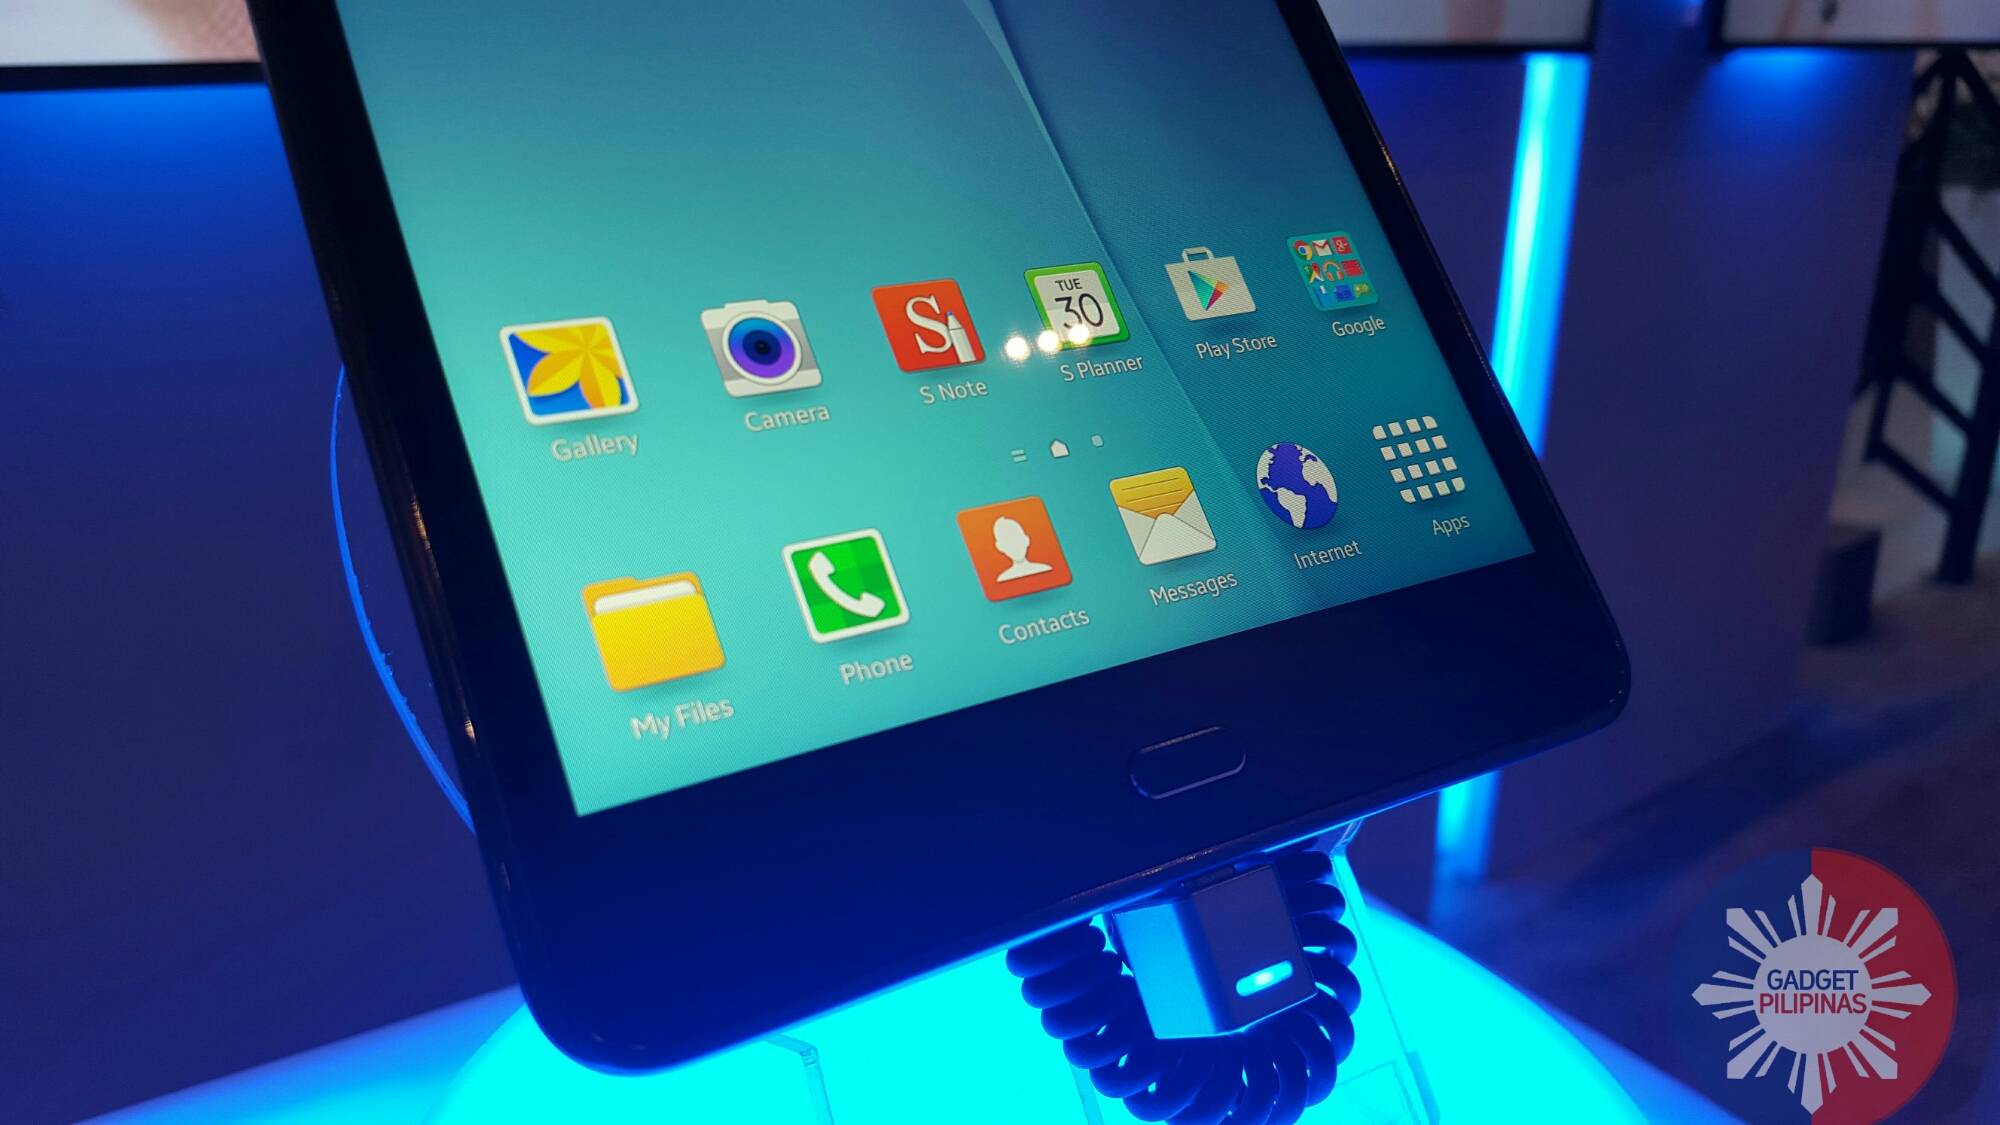 Samsung Launches Galaxy Tab A, Encourages Artists and Designers to Activate their Ideas